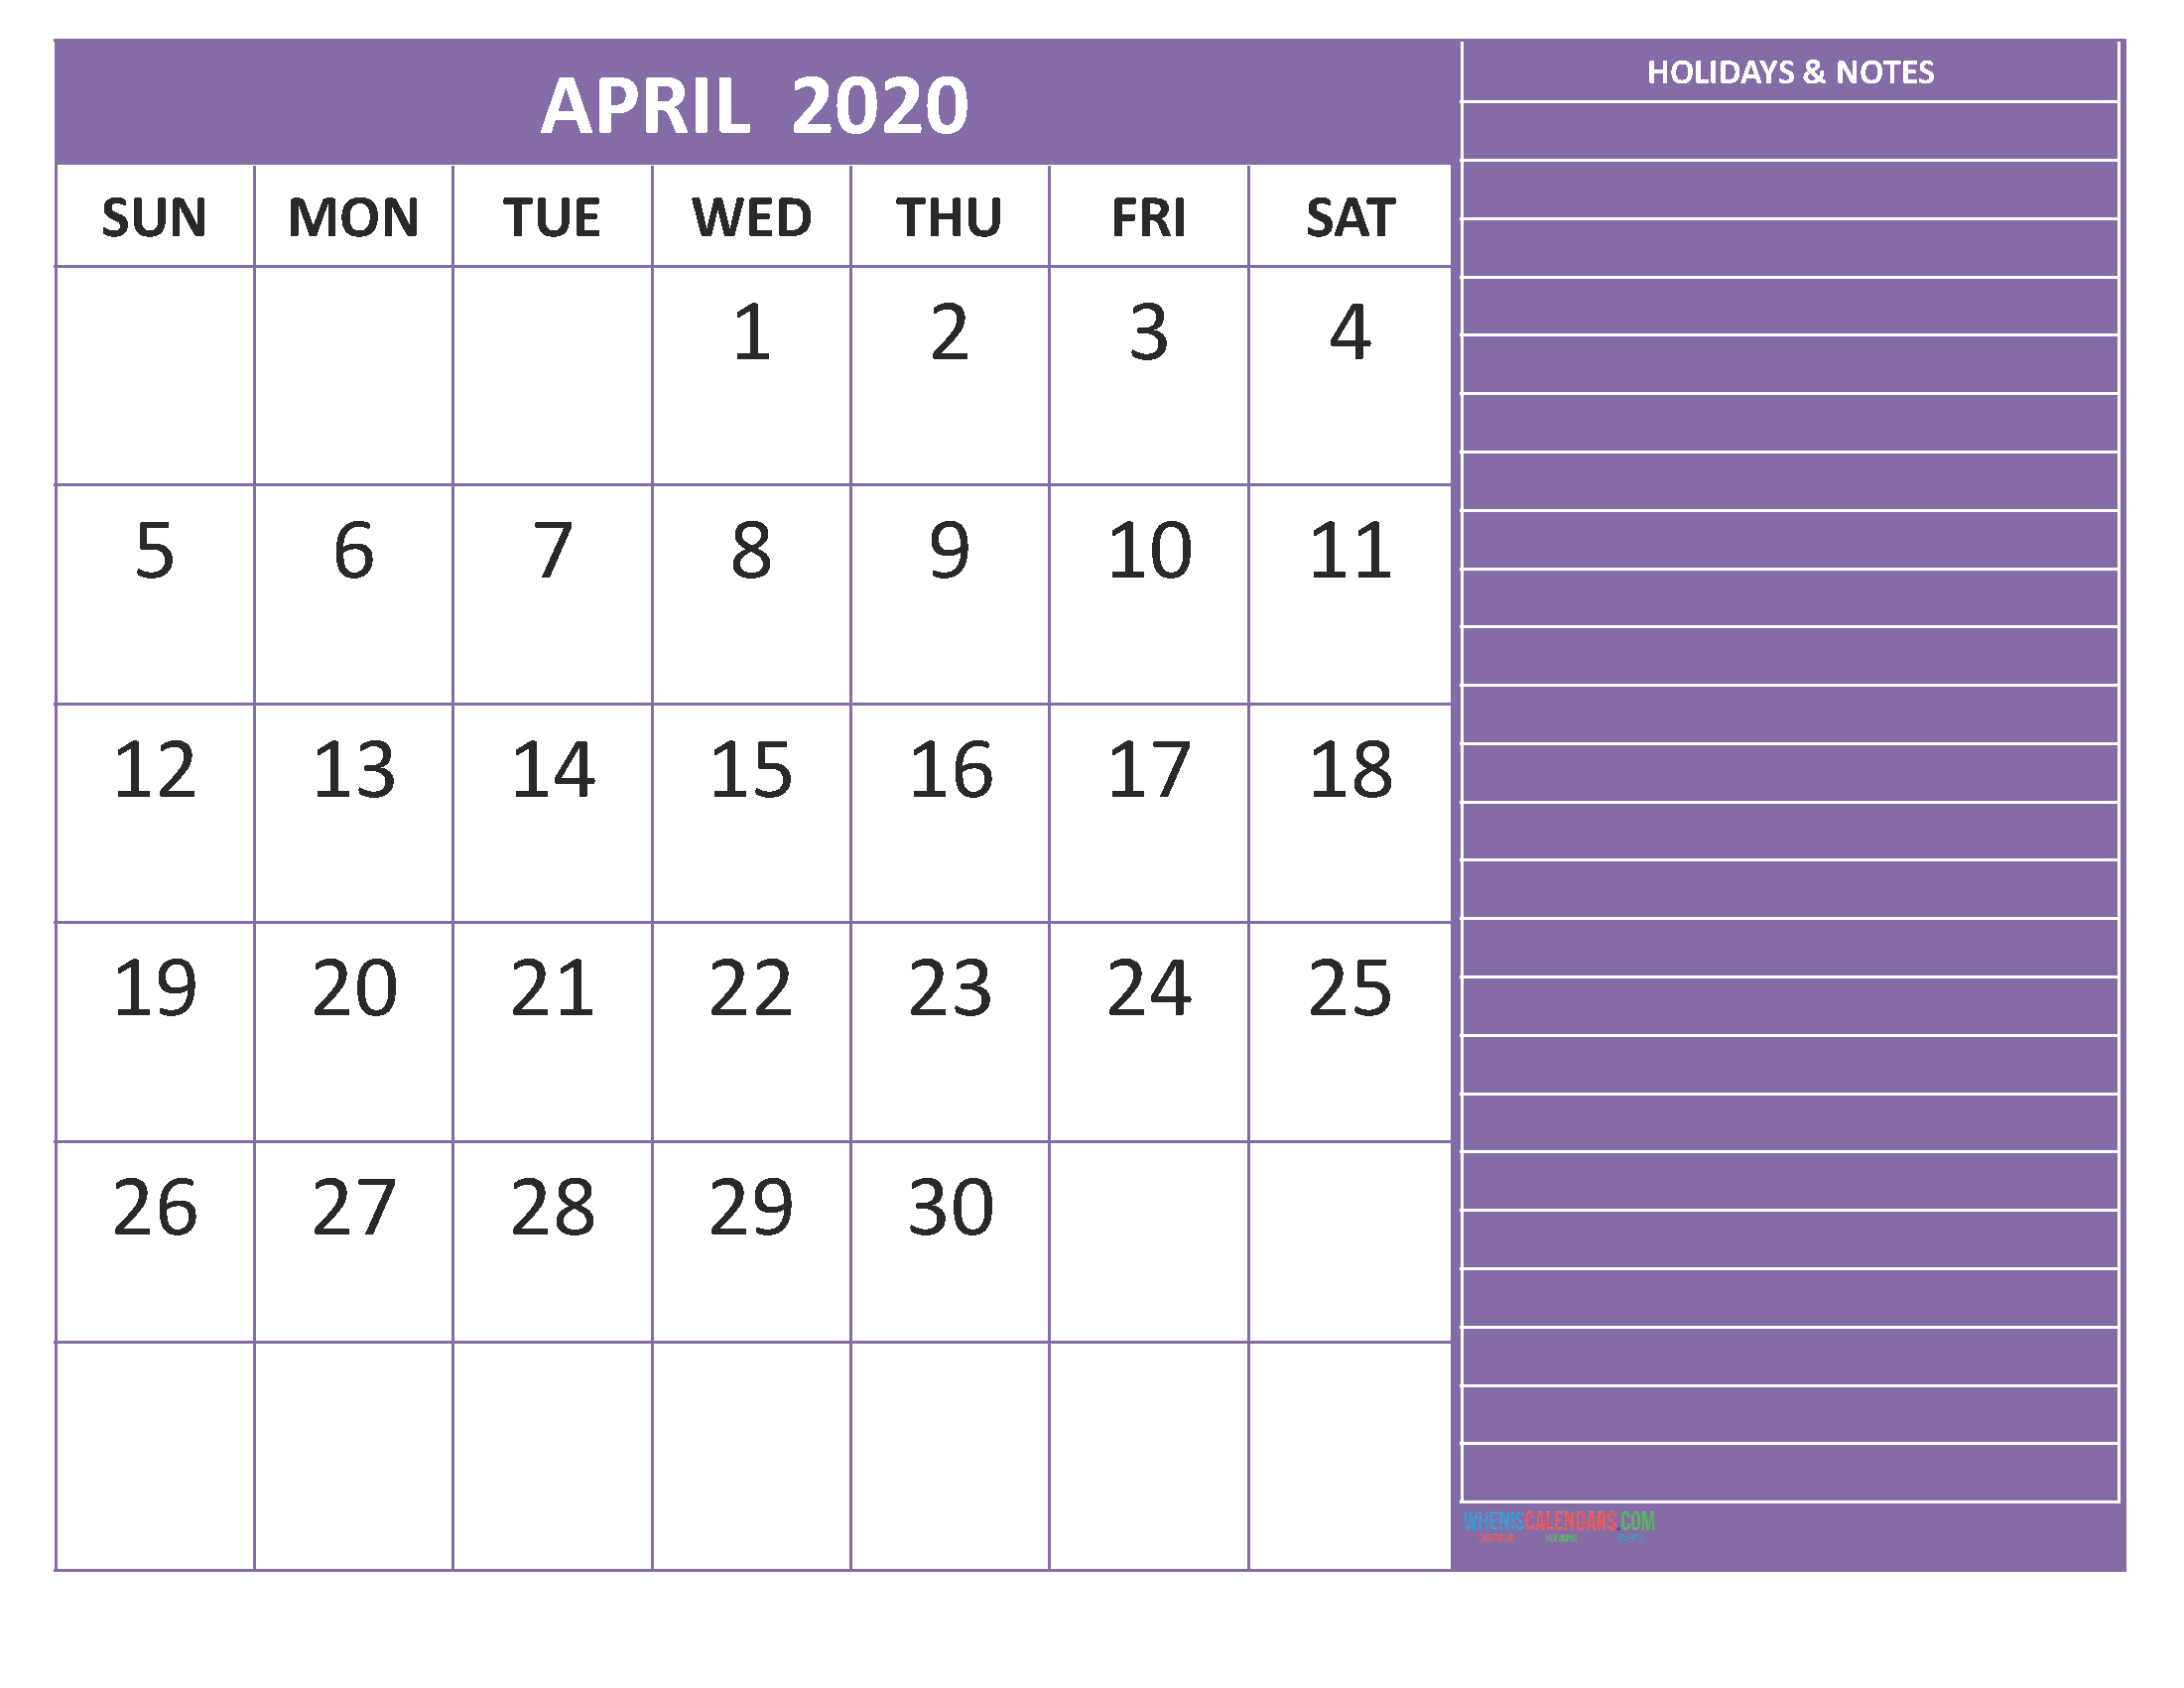 April 2020 Calendar with Holidays Free Printable by Word